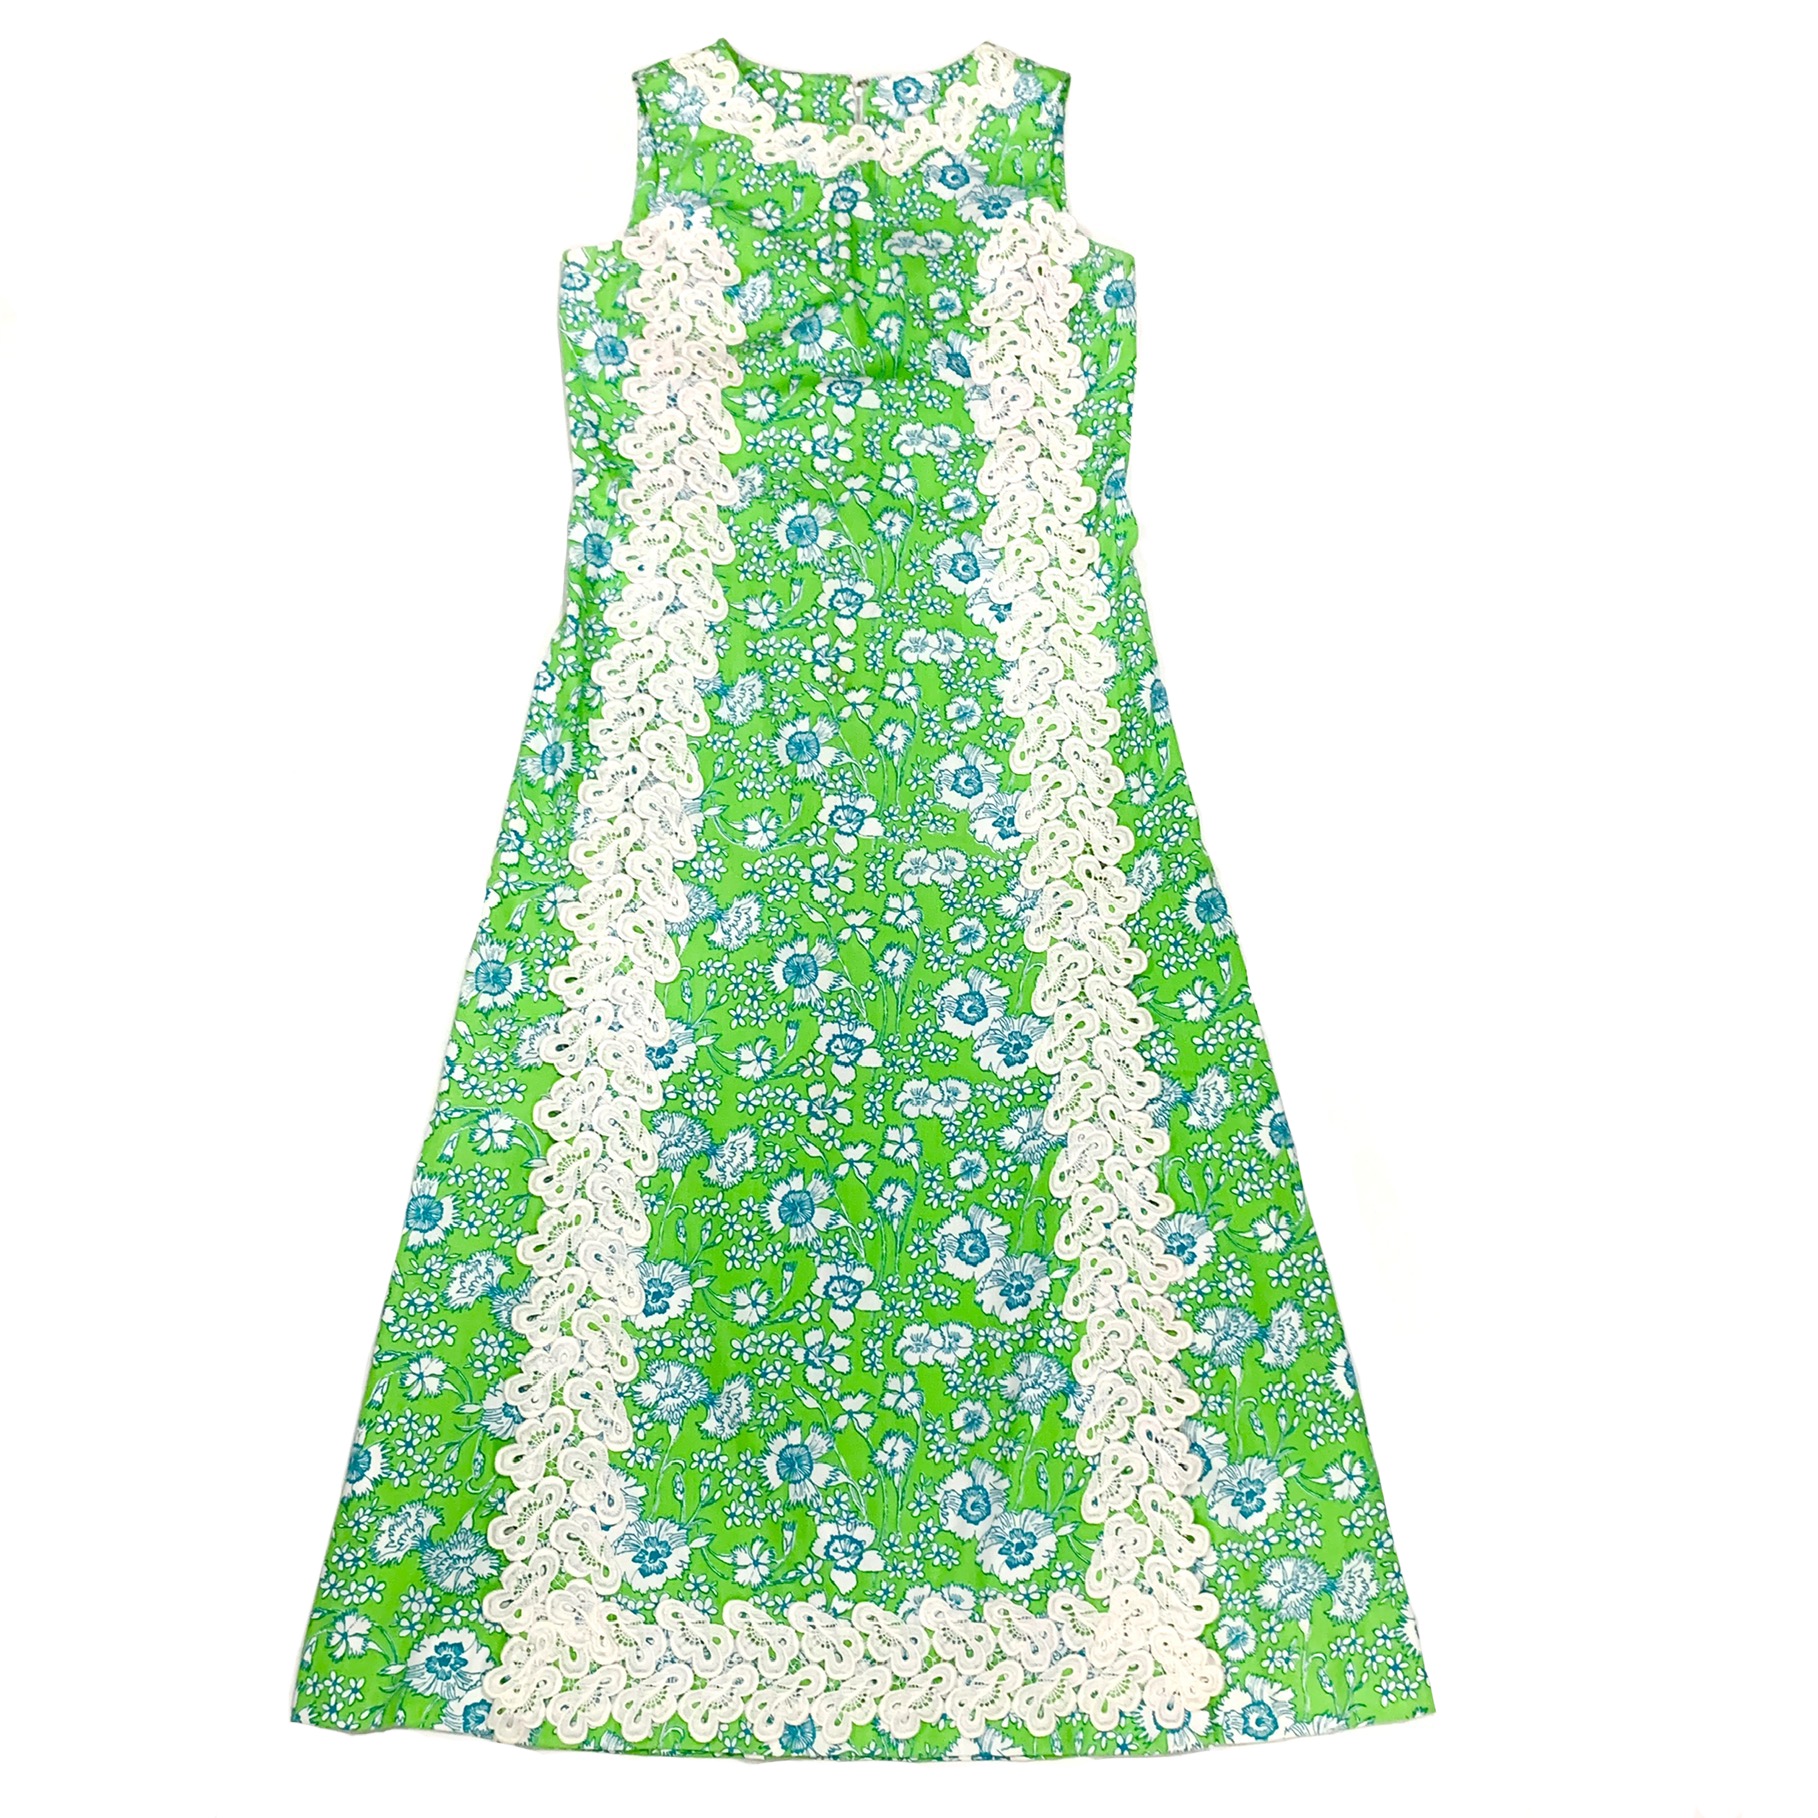 lilly pulitzer green dress